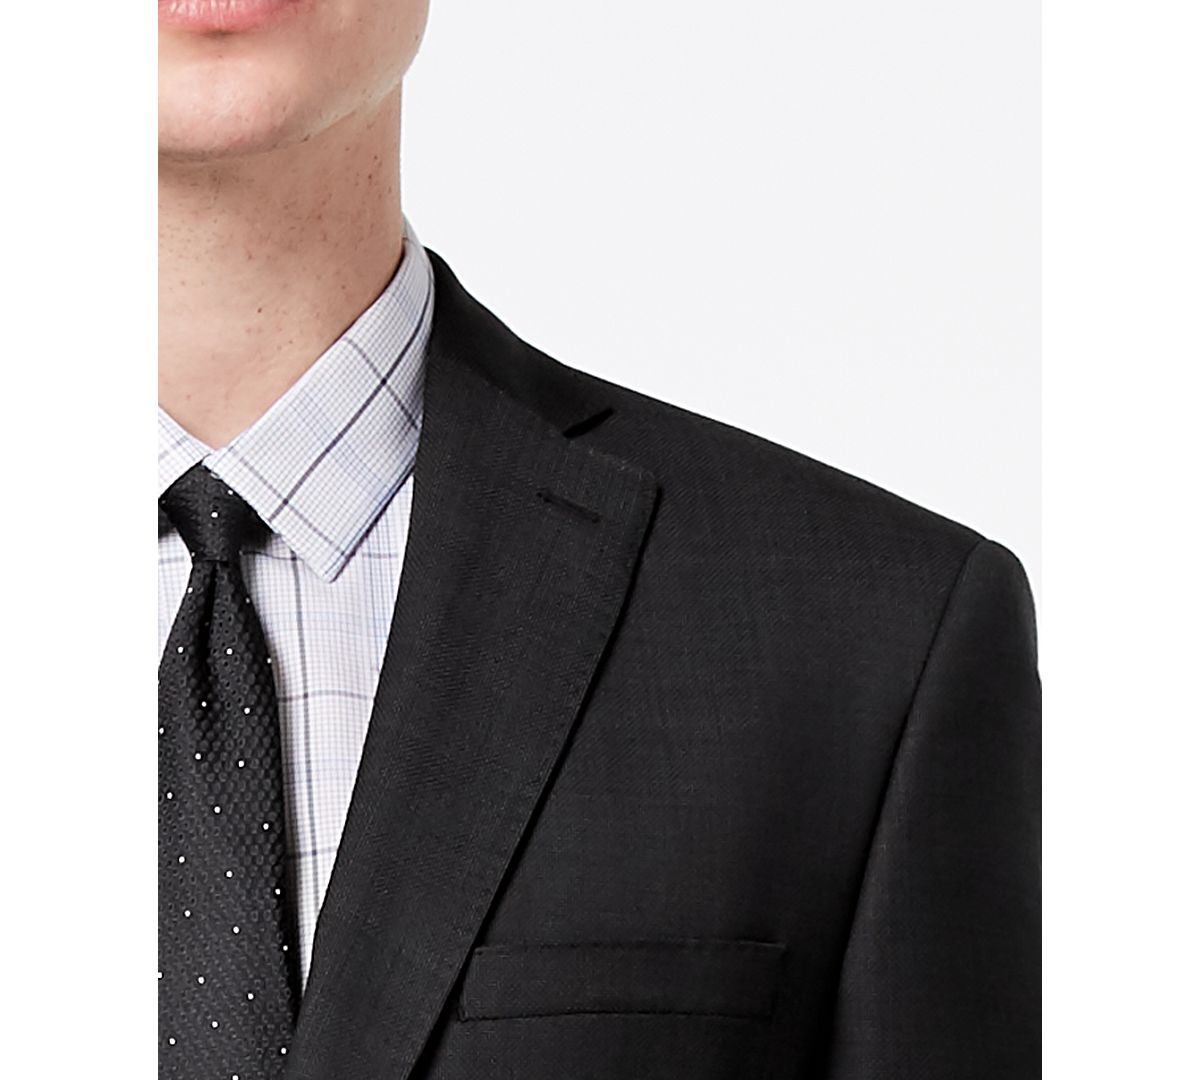 Dkny Modern-fit Stretch Textured Wool Suit Jacket Black